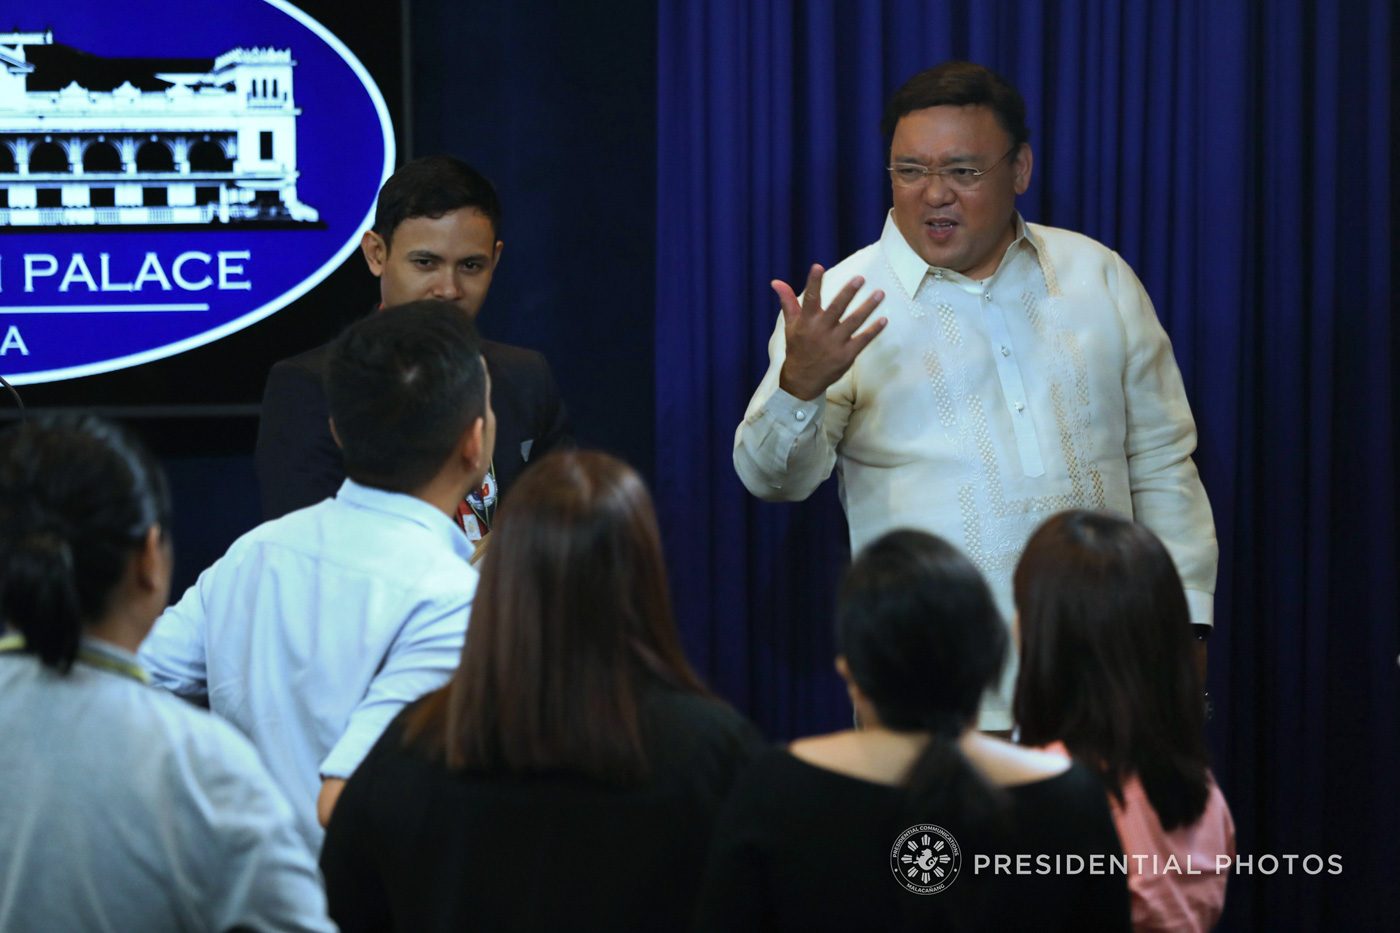 Roque claims mainstream media doesn’t report the truth